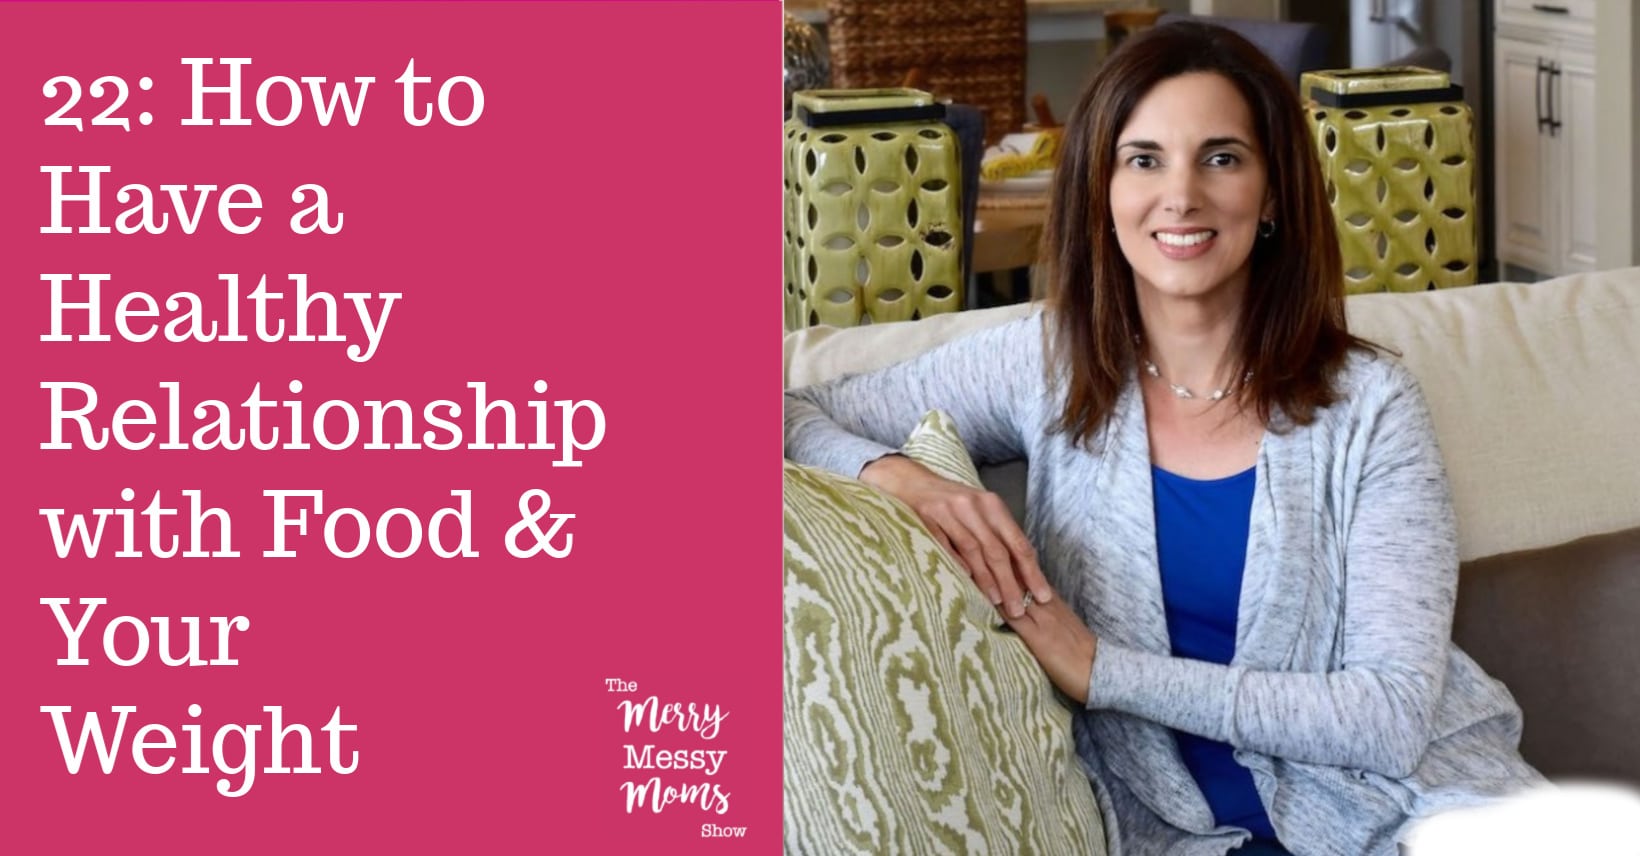 How to Have a Healthy Relationship with Food and Your Weight with Allison Robertson - an Integrative Nutrition Health Coach